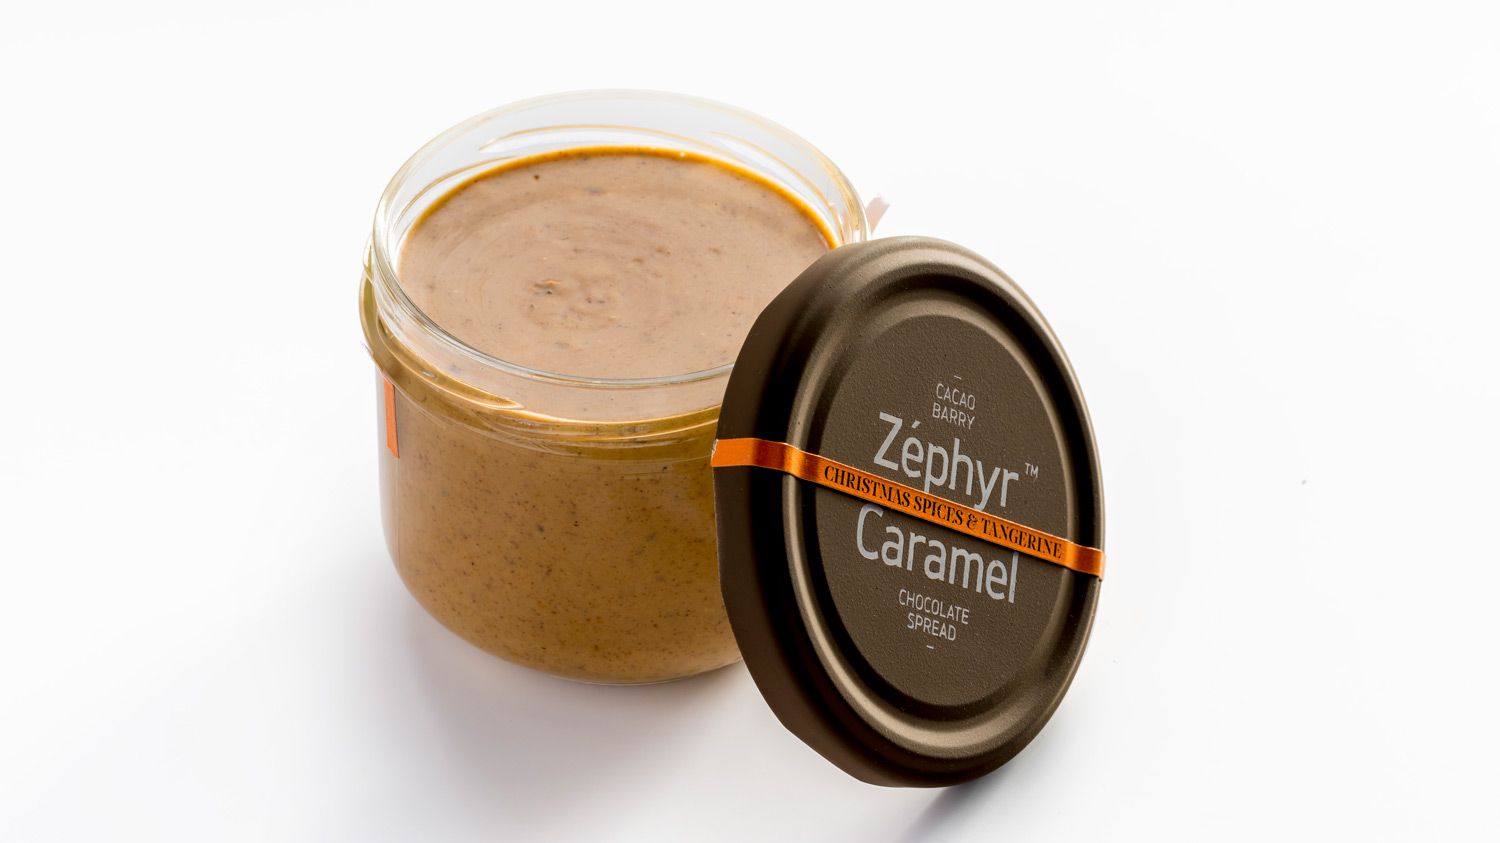 Cream spread with spices and Zéphyr™ Caramel